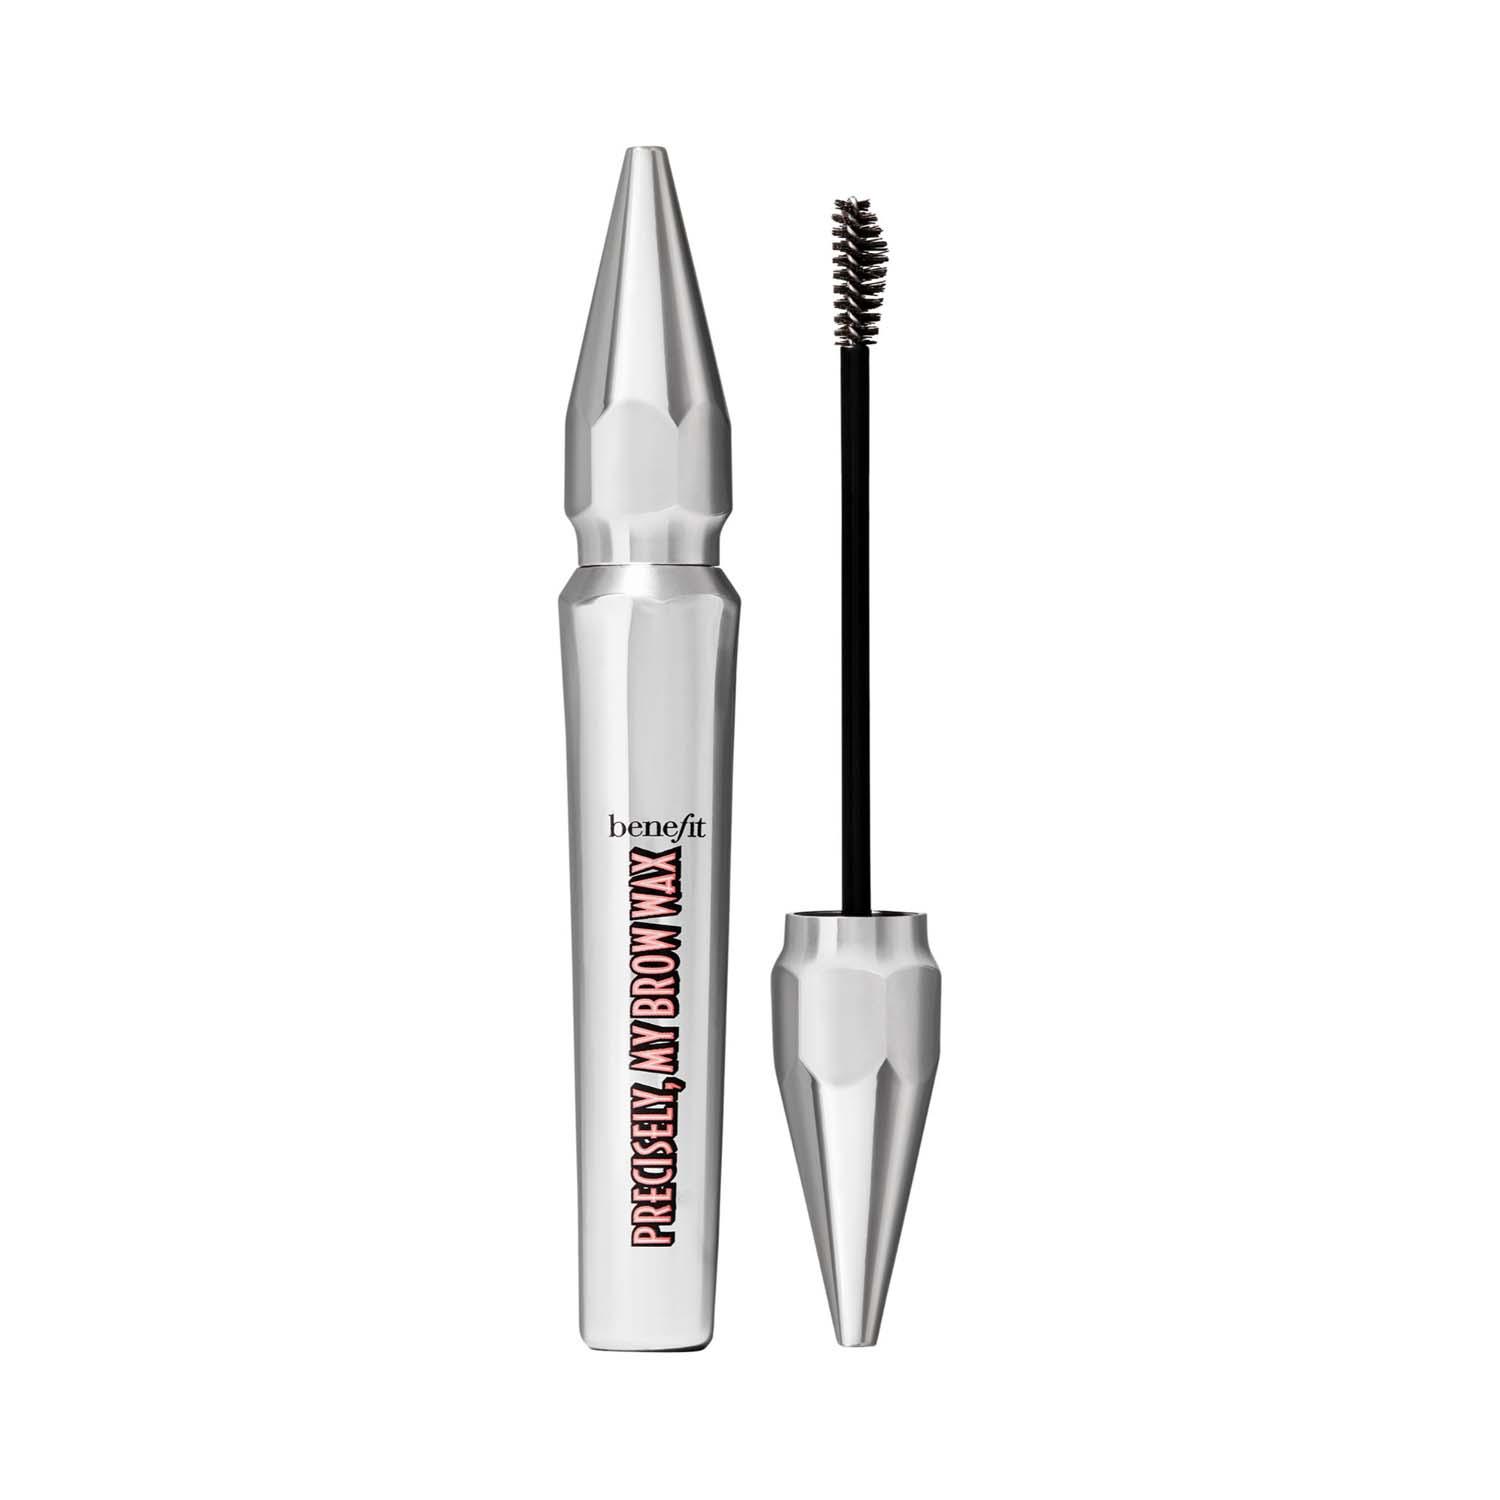 Benefit Cosmetics | Benefit Cosmetics Precisely, My Brow Wax - 2.5 Neutral Blonde (5 g)